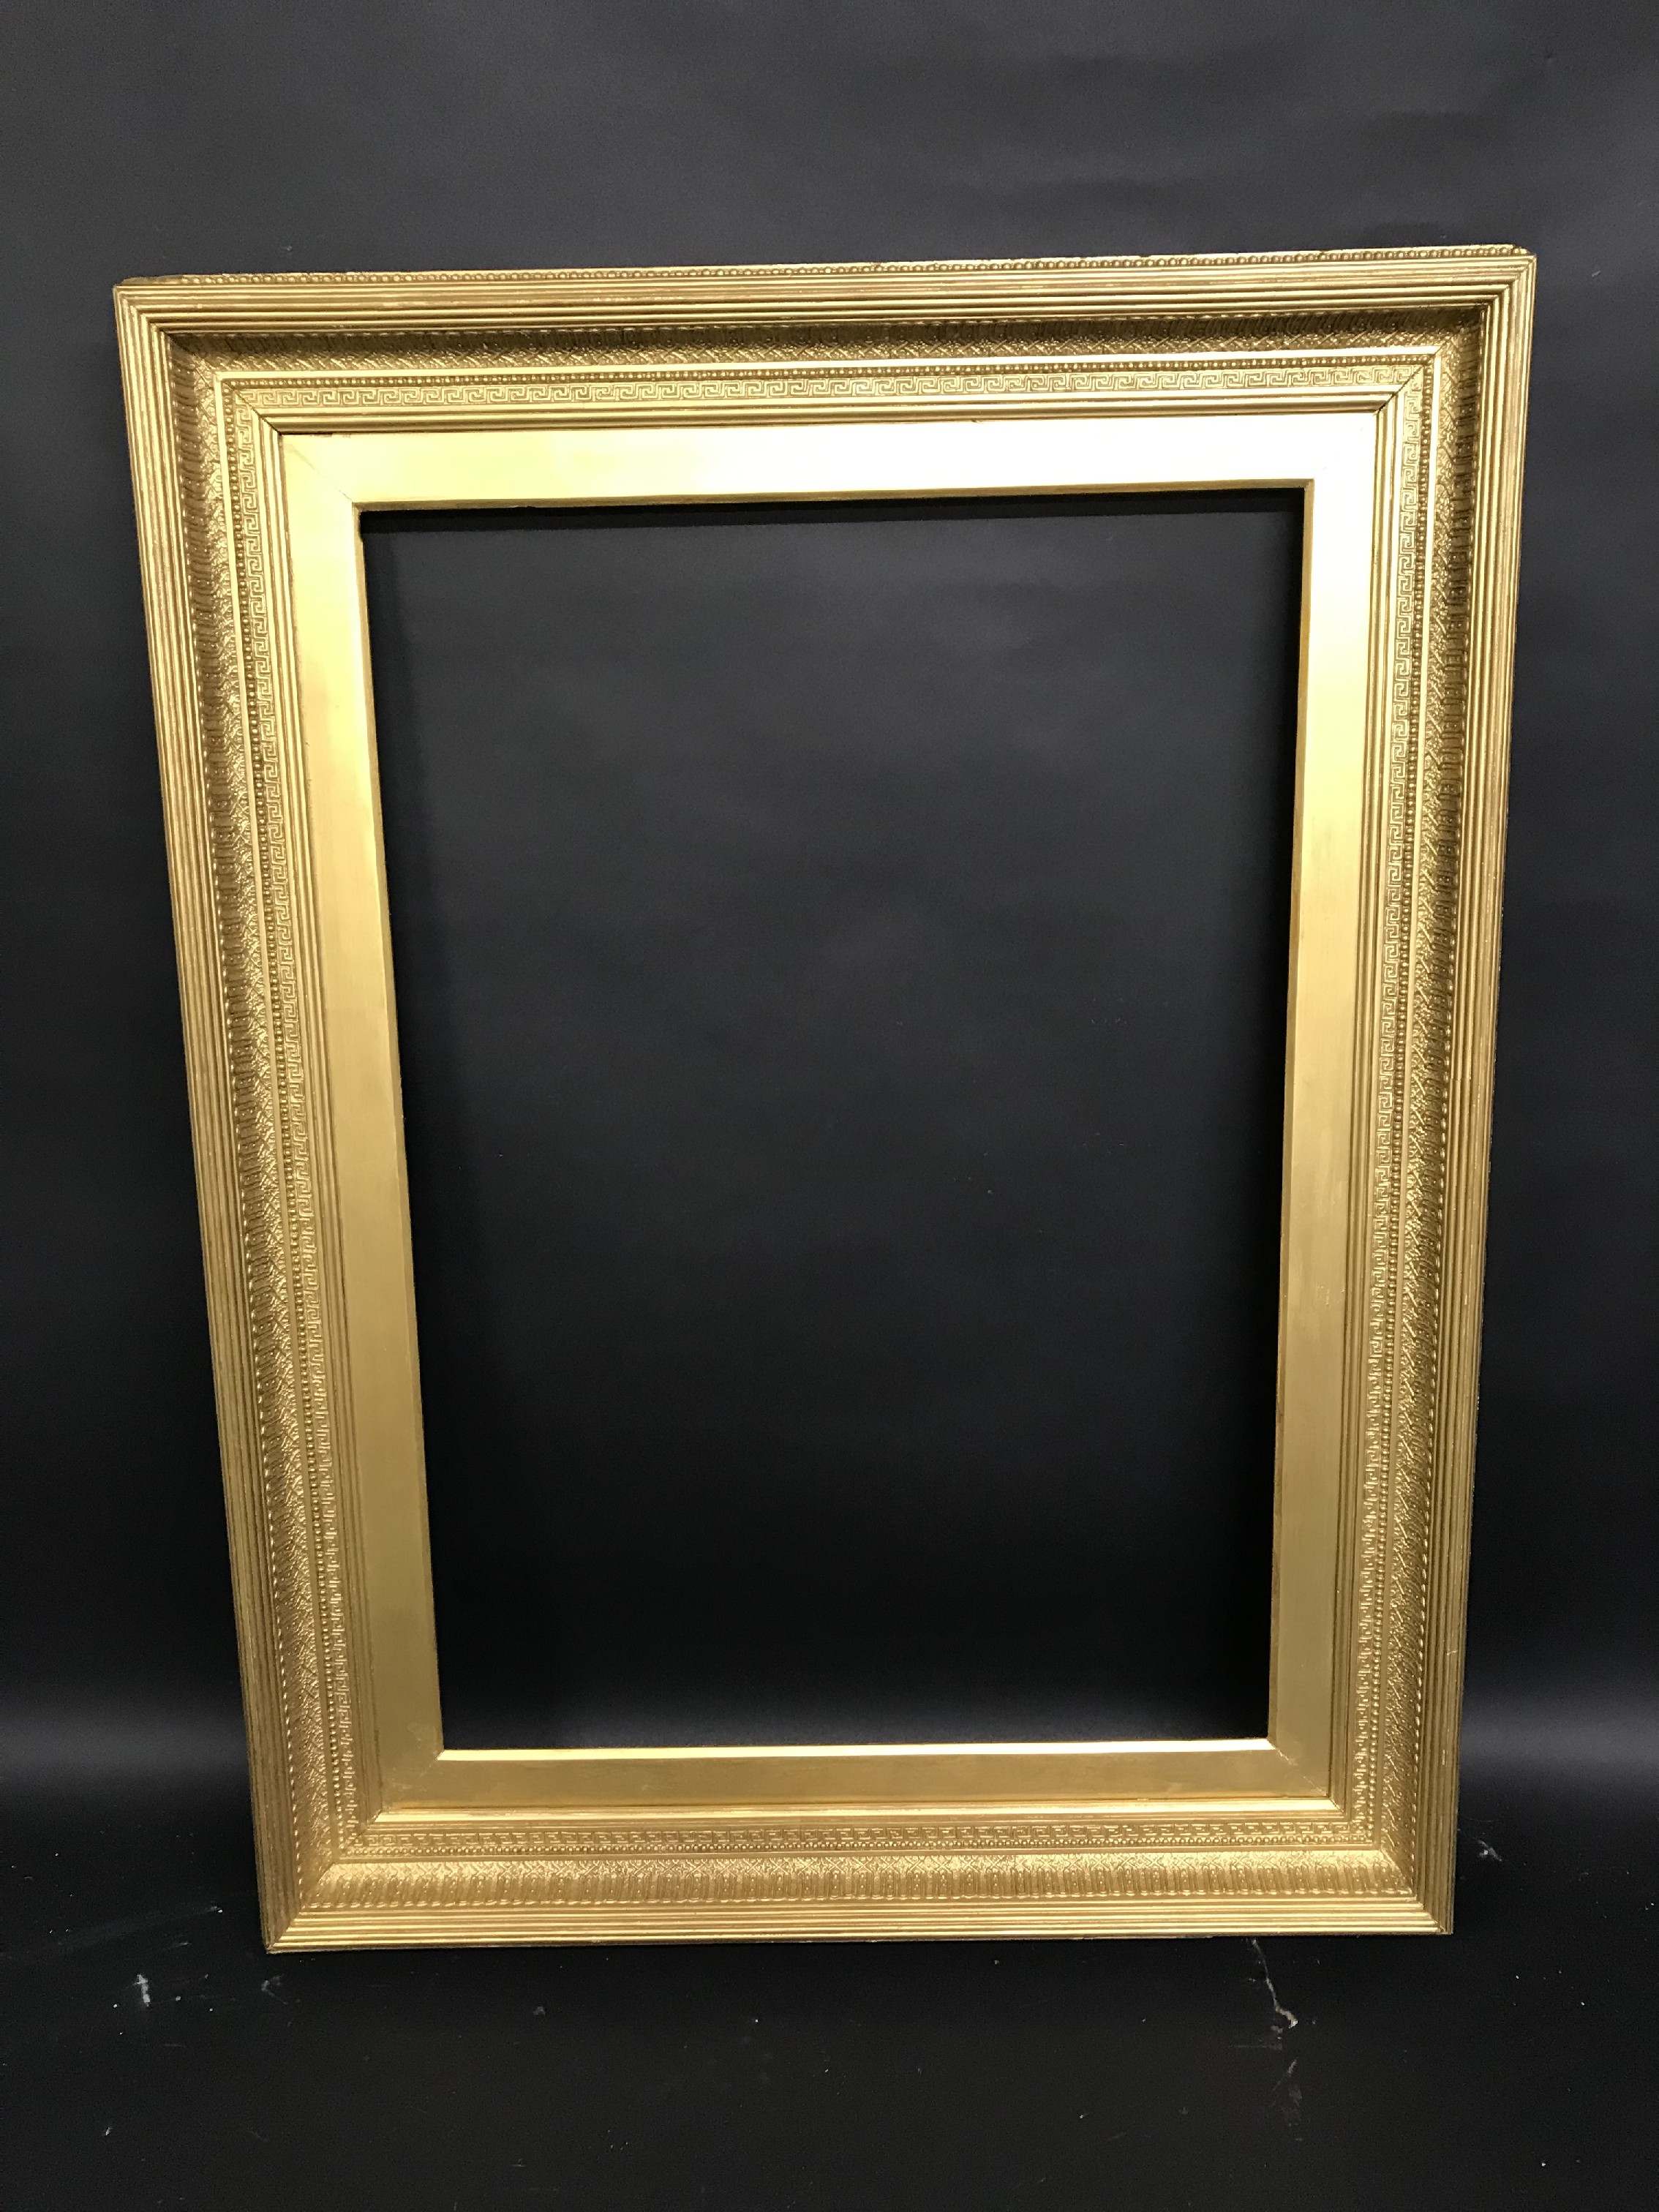 19th Century English School. A Gilt Composition Frame, 35.5" x 24.5" (rebate). - Image 2 of 3